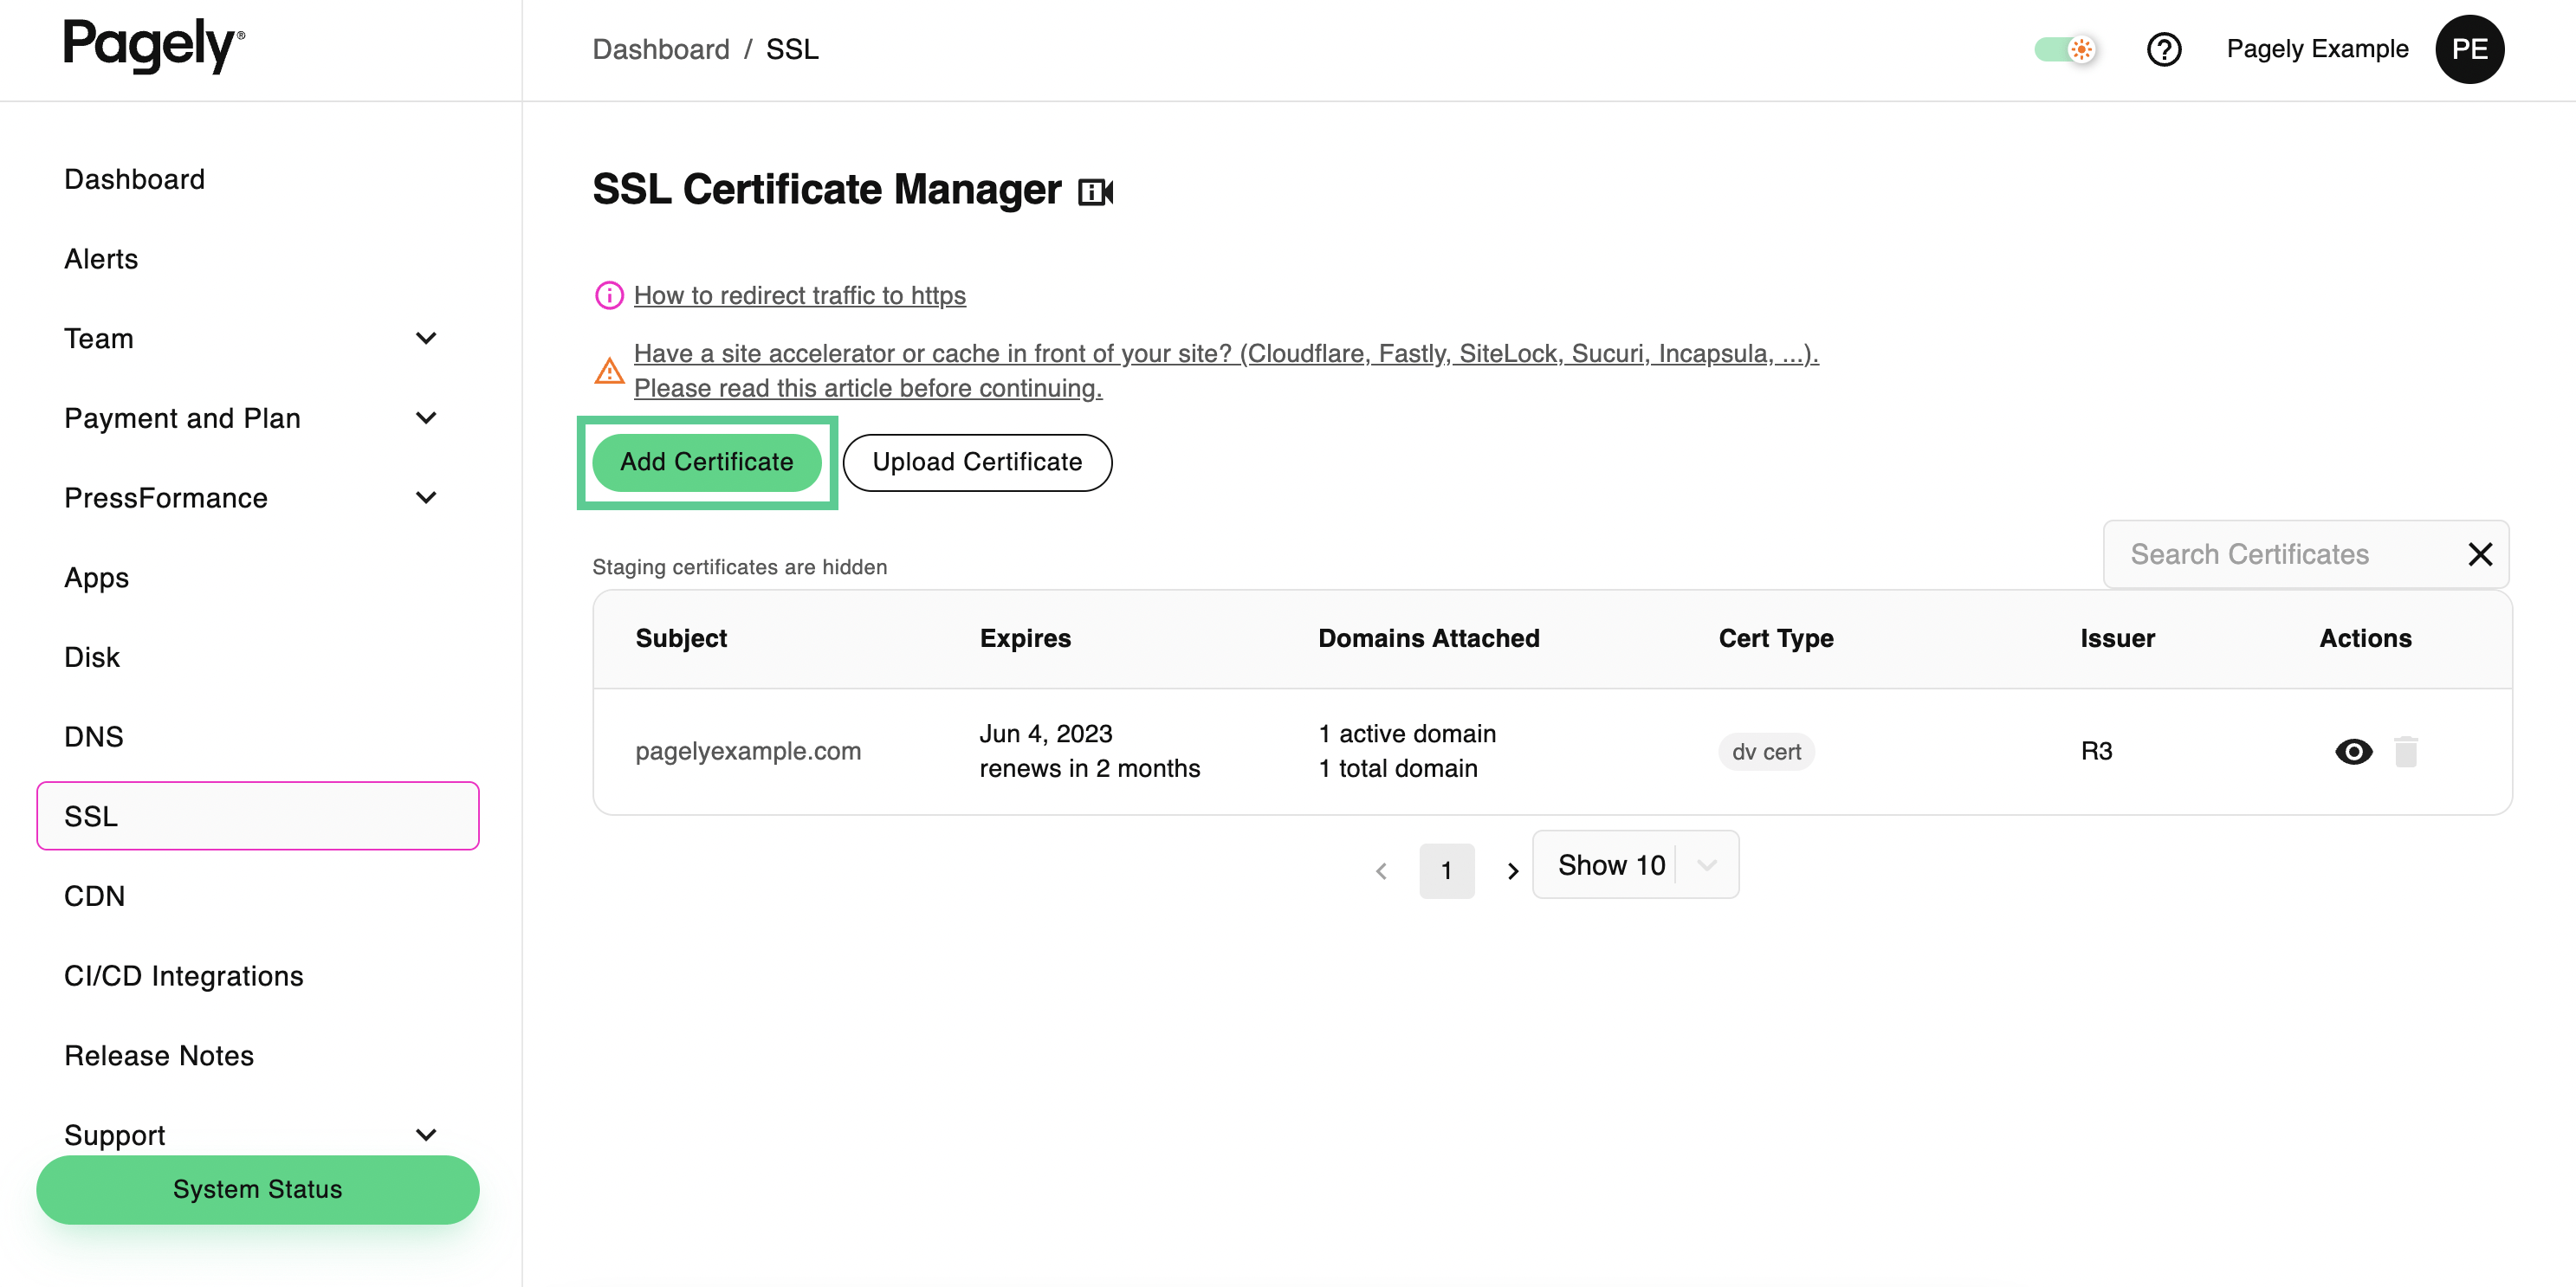 Atomic click on the Upload Certificate button